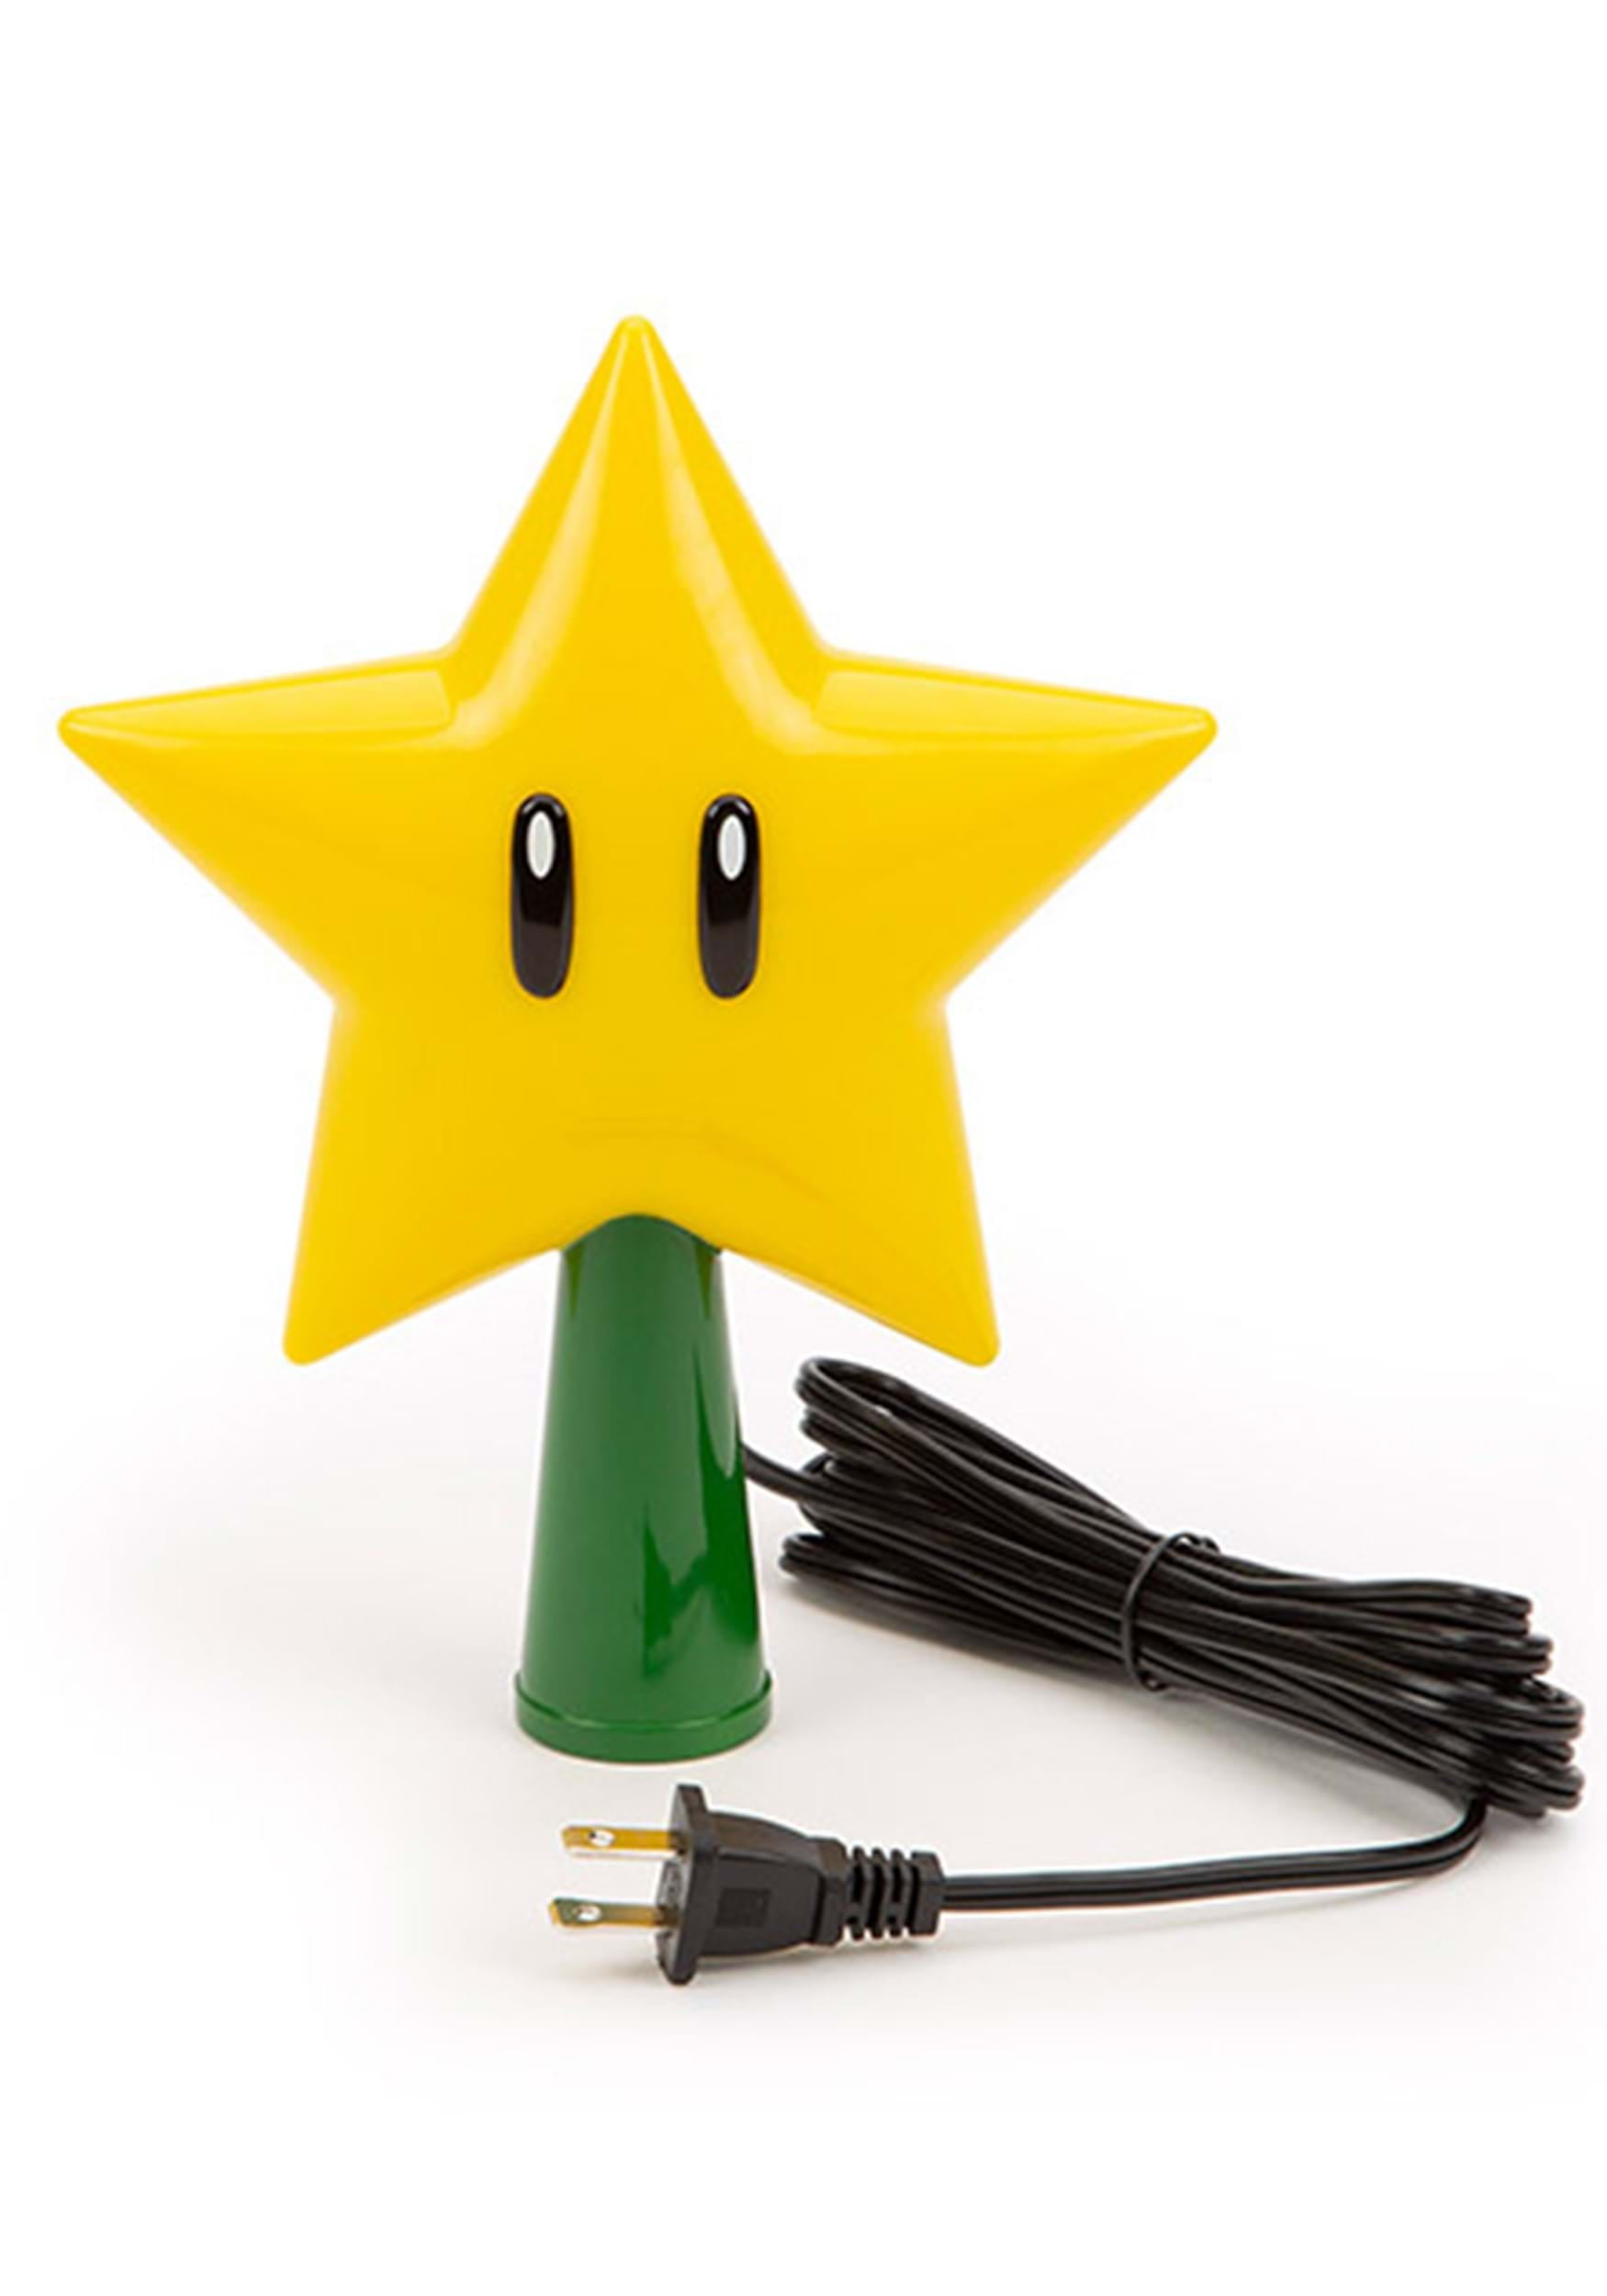  Tree Topper Mario Super Star Gen 2 Plug in Light Up Christmas :  Home & Kitchen